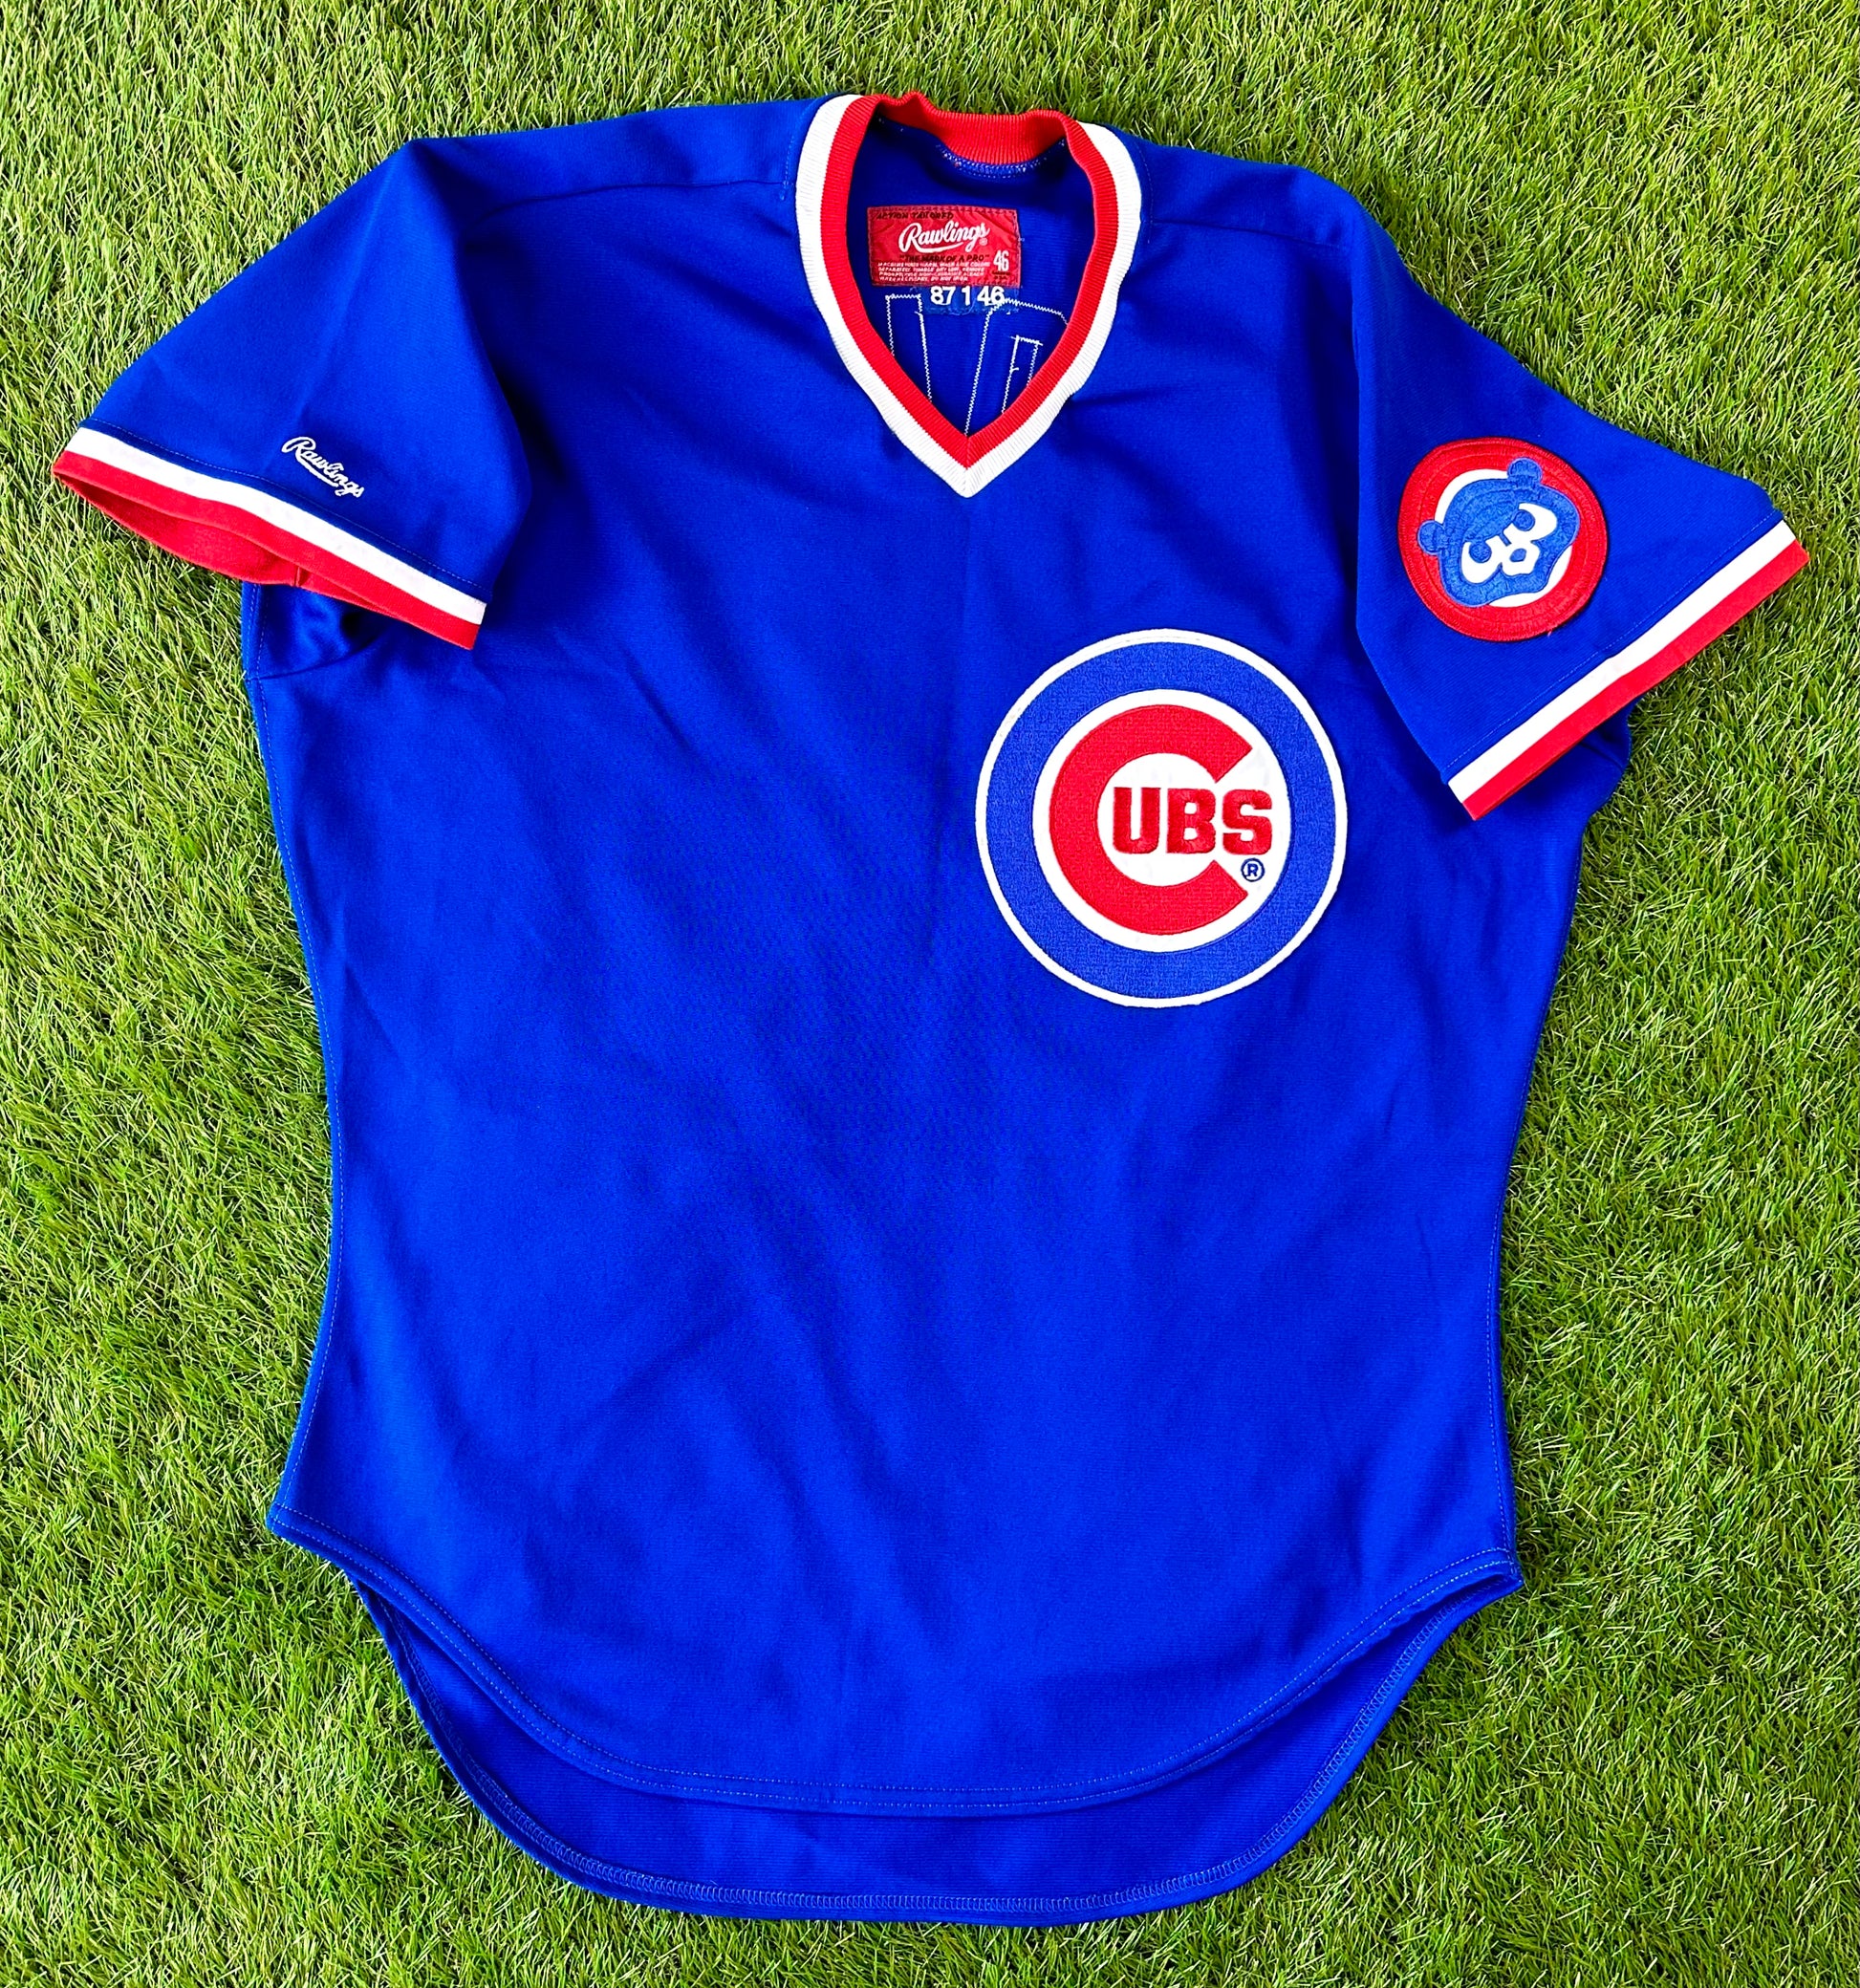 NHL MLB Replica Chicago Cubs Hockey Jerseys. Any name and number you want